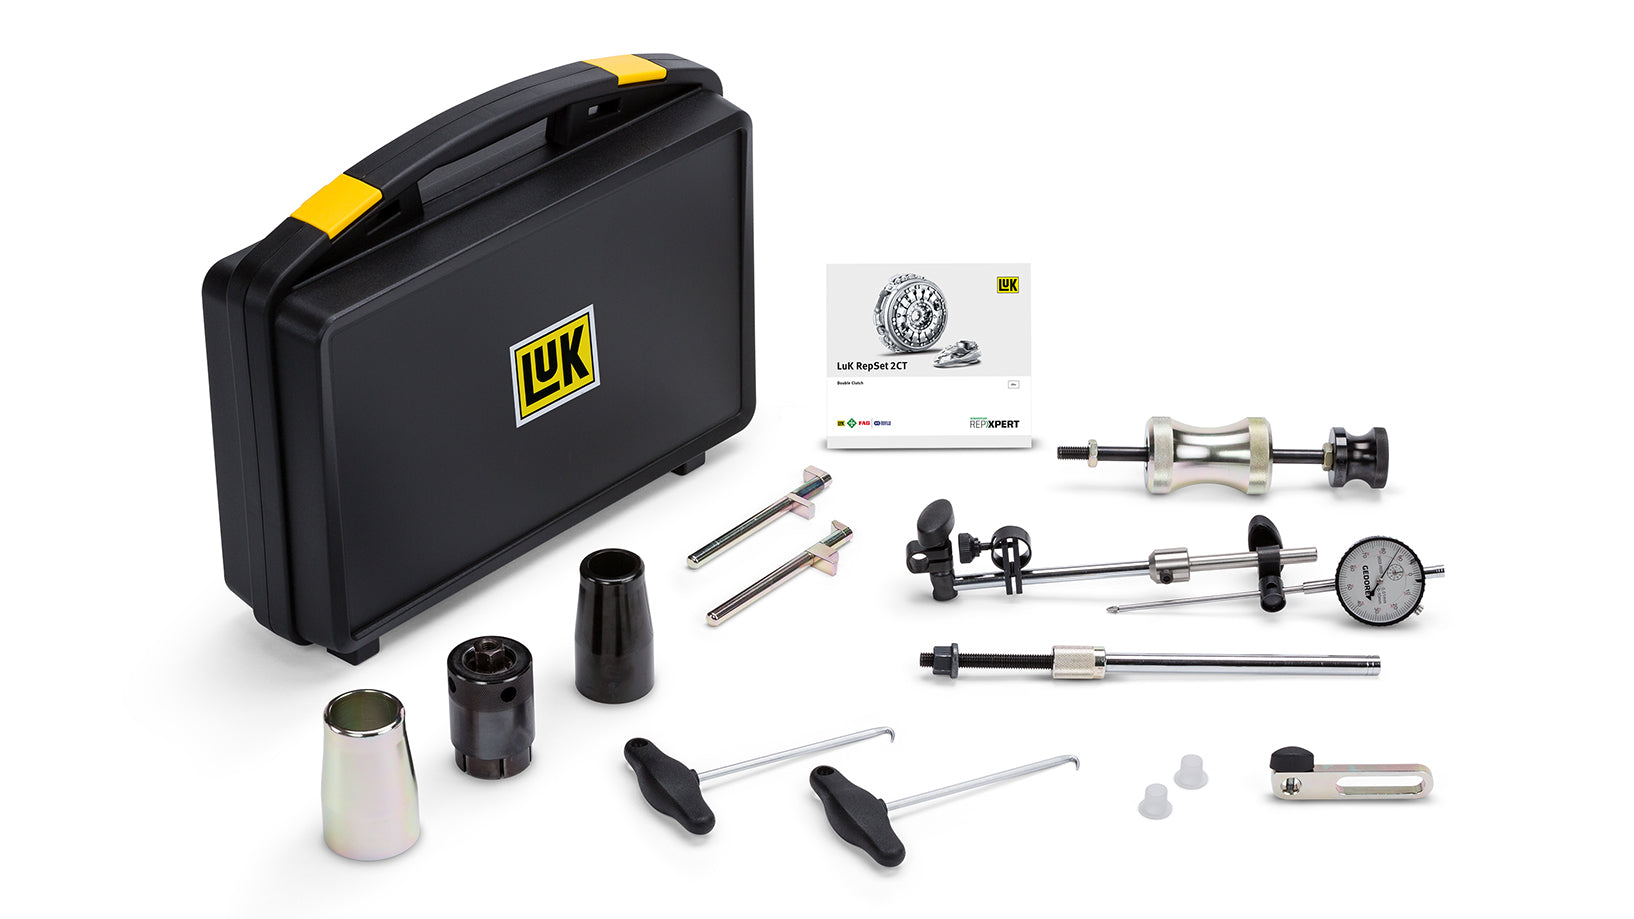 LuK 2CT tool kit for Volkswagen wet double clutches. Case sitting beside full contents of the kit